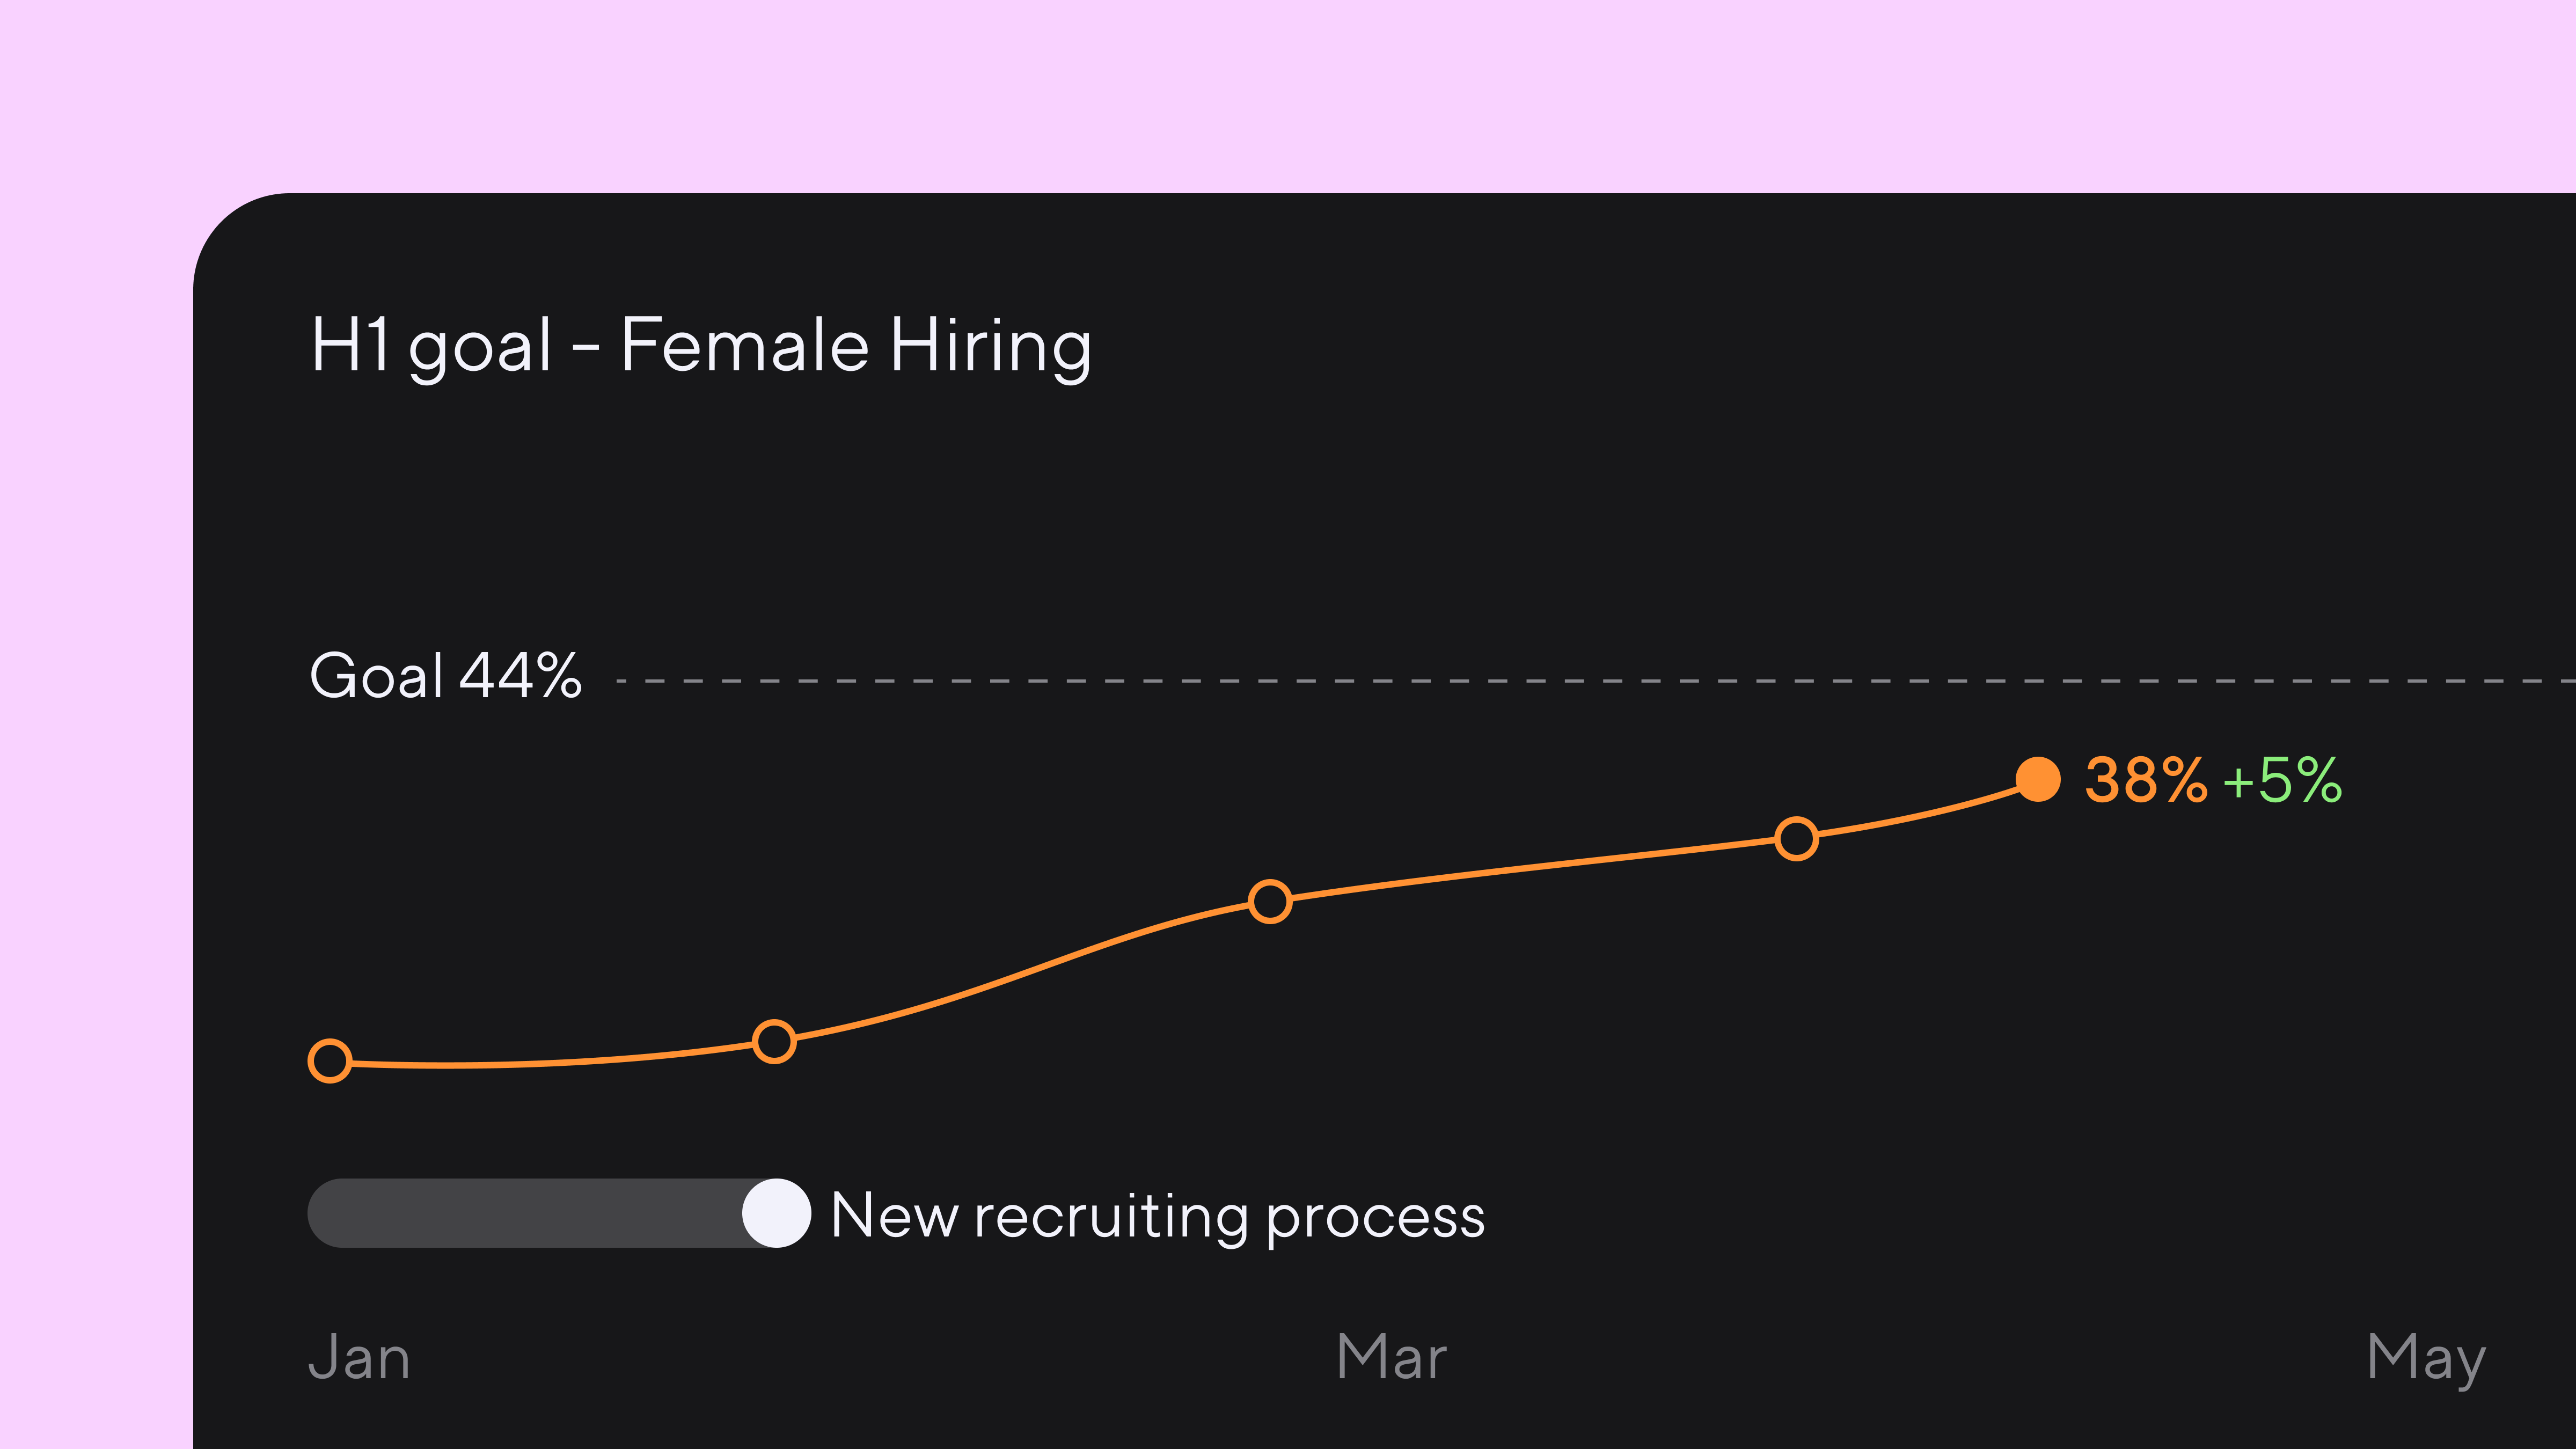 Line graph titled H1 goal - Female Hiring. The chart trends upward and is at 38% in mid-April, a 5% increase, with a goal of 44%. The chart spans January through May, with the new recruiting process in January.